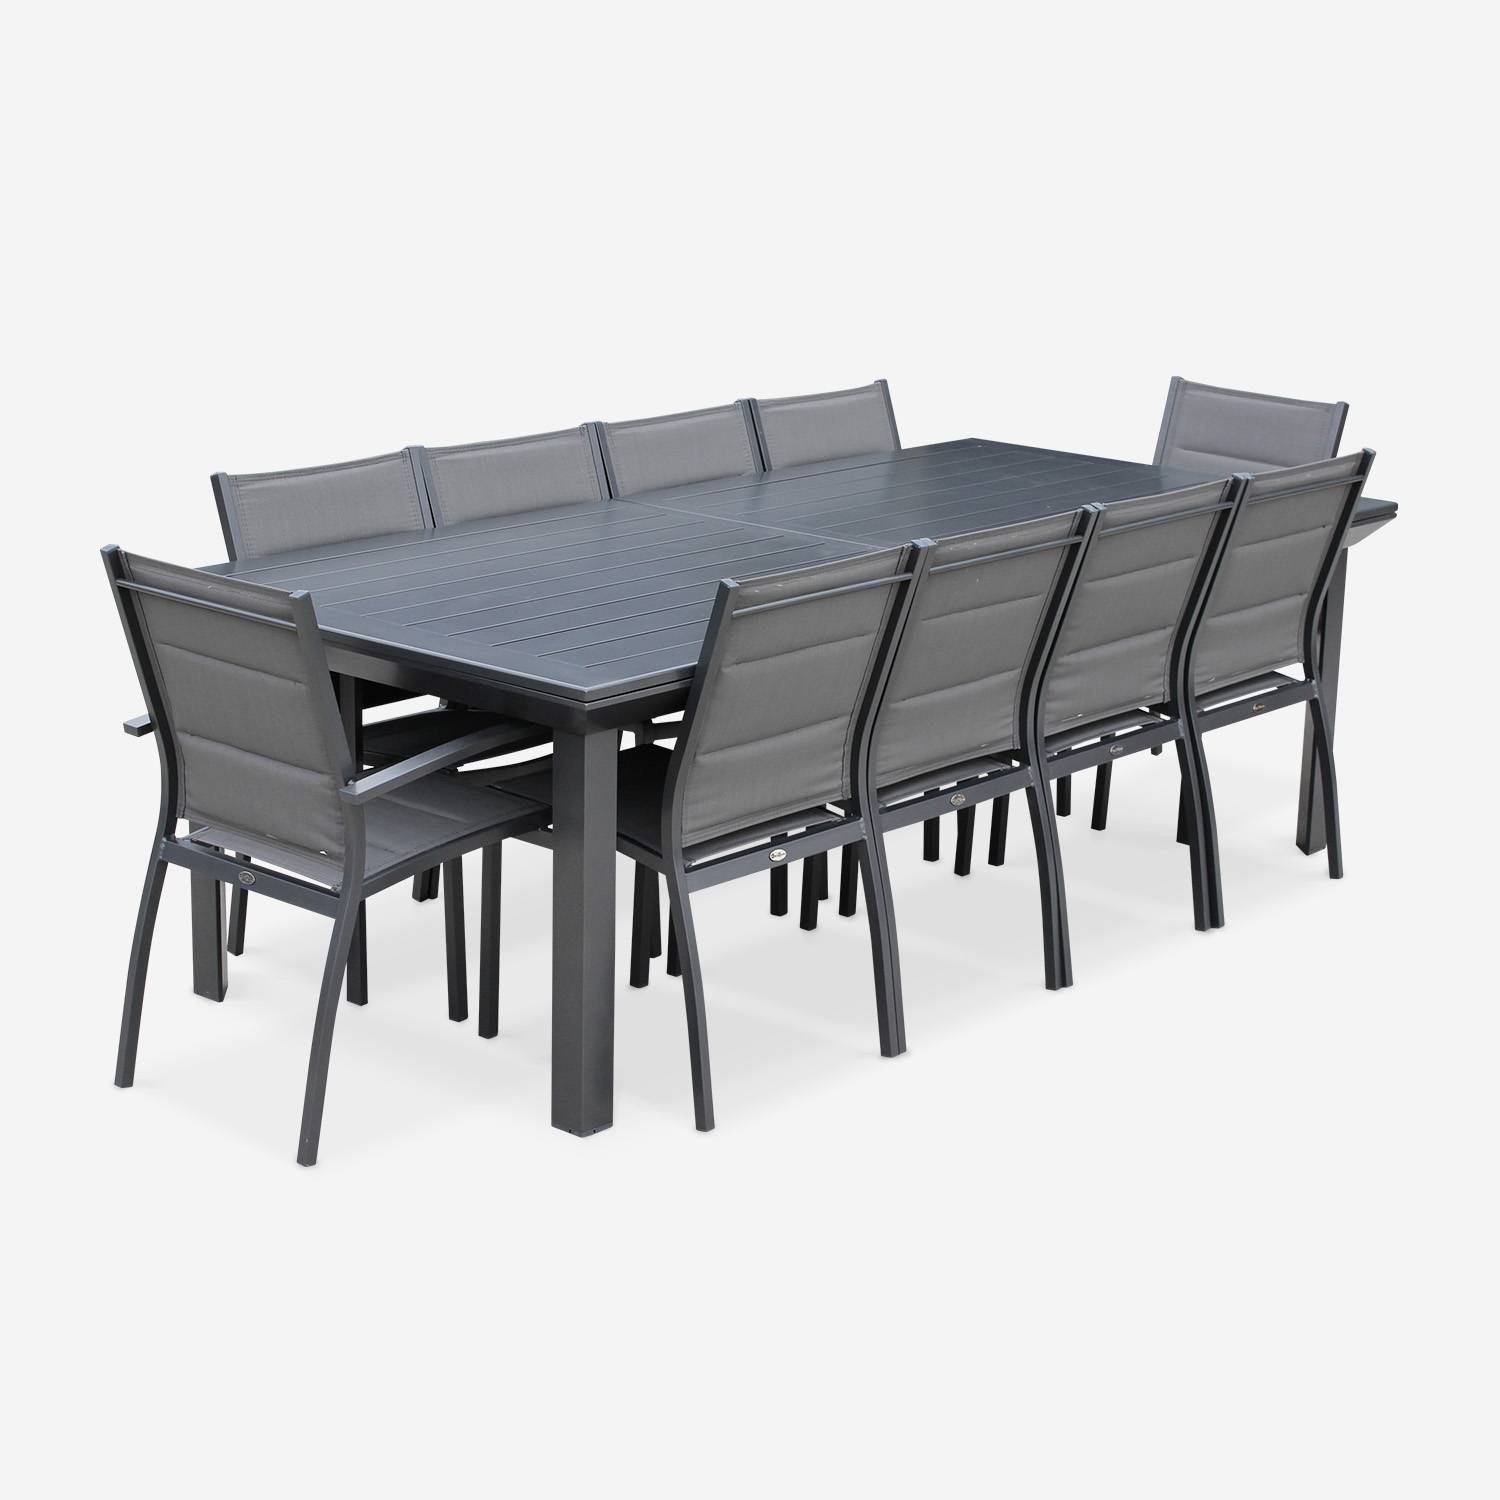 10-seater garden dining set, extendable 235-335cm aluminium table, 8 chairs and 2 armchairs - Odenton - Anthracite frame, Charcoal Grey textilene Photo3